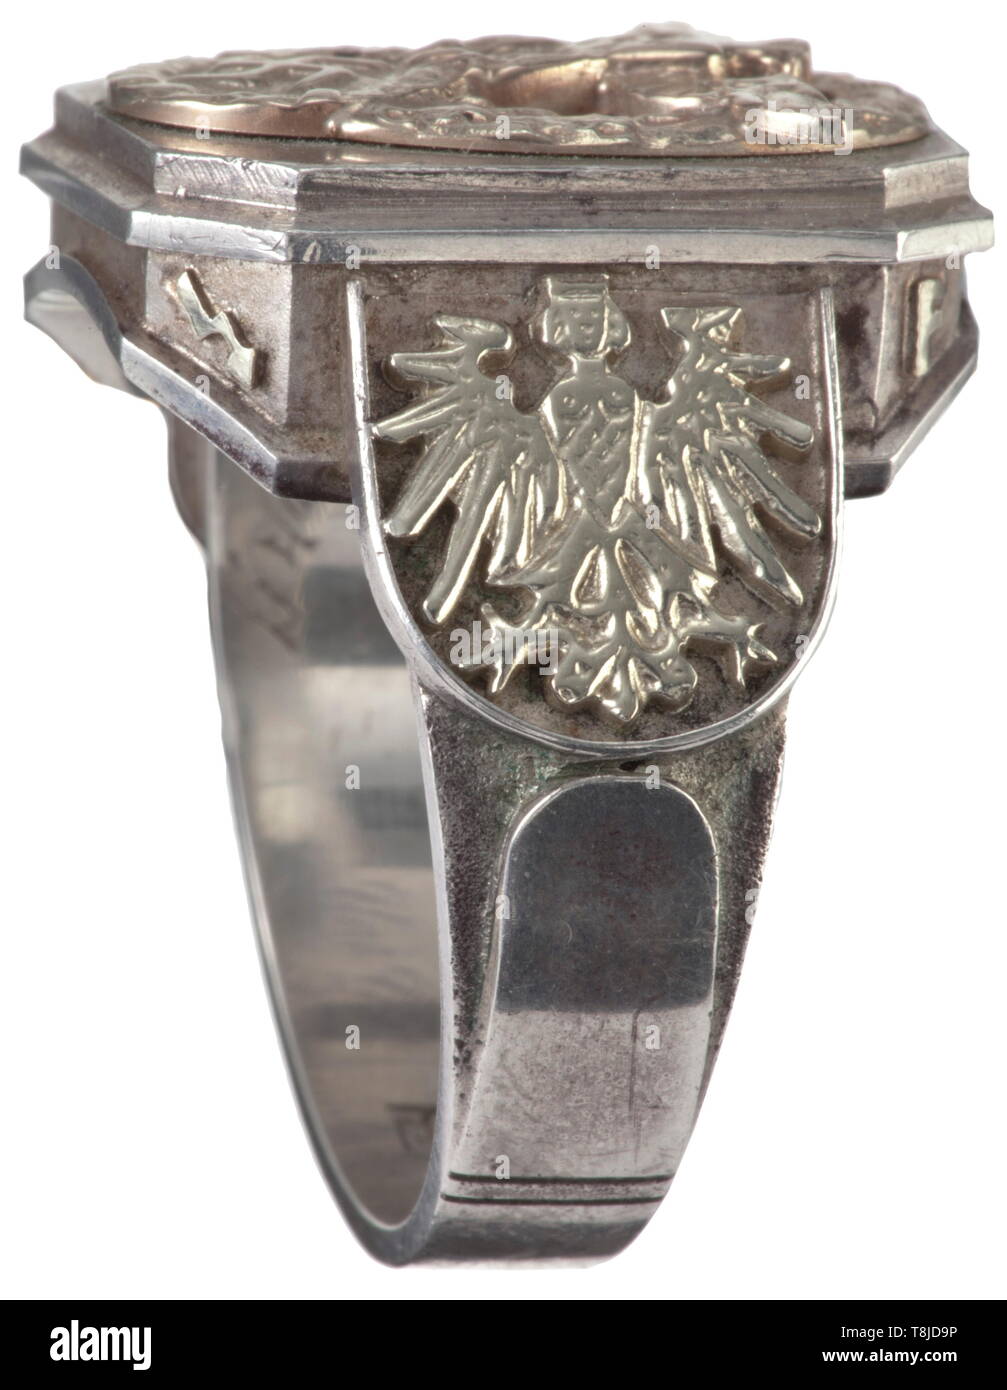 Benno Martin (1893 - 1975) - an honour ring of the police president of Nuremberg High-quality gold work, silver with applied golden coat of arms of the city of Nuremberg and golden Nuremberg Funnel, a golden police eagle on the seal surface. The shank inscribed with 'Uns. Chef in steter Erg. gew. die Nasta Nürnberg' (tr. 'Dedicated to our chief in continuous devotion, Nasta Nuremberg'). Complete with a silver-plated case (the inside lined with blue velvet). historic, historical, 20th century, Additional-Rights-Clearance-Info-Not-Available Stock Photo